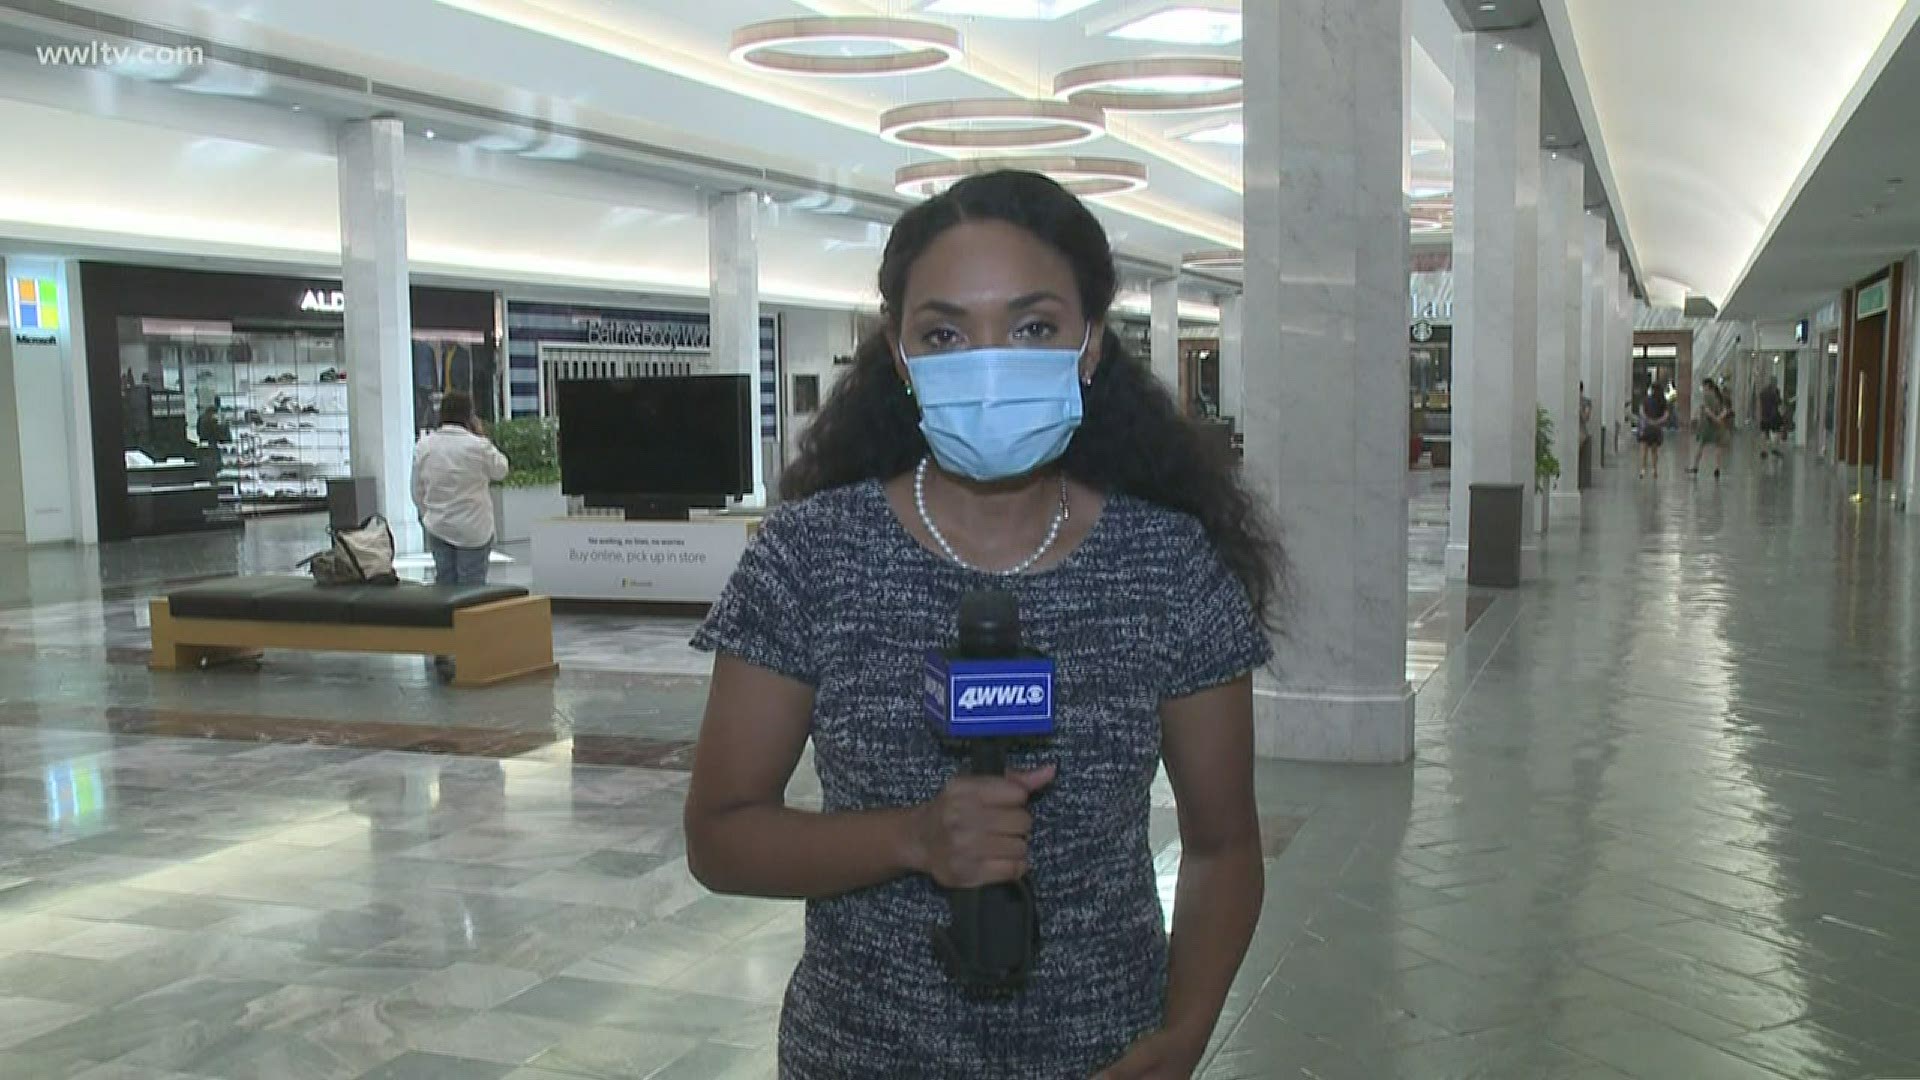 Lakeside Mall in Metairie reopened Tuesday as the state of Louisiana continues to get back to business in the midst of the coronavirus outbreak.